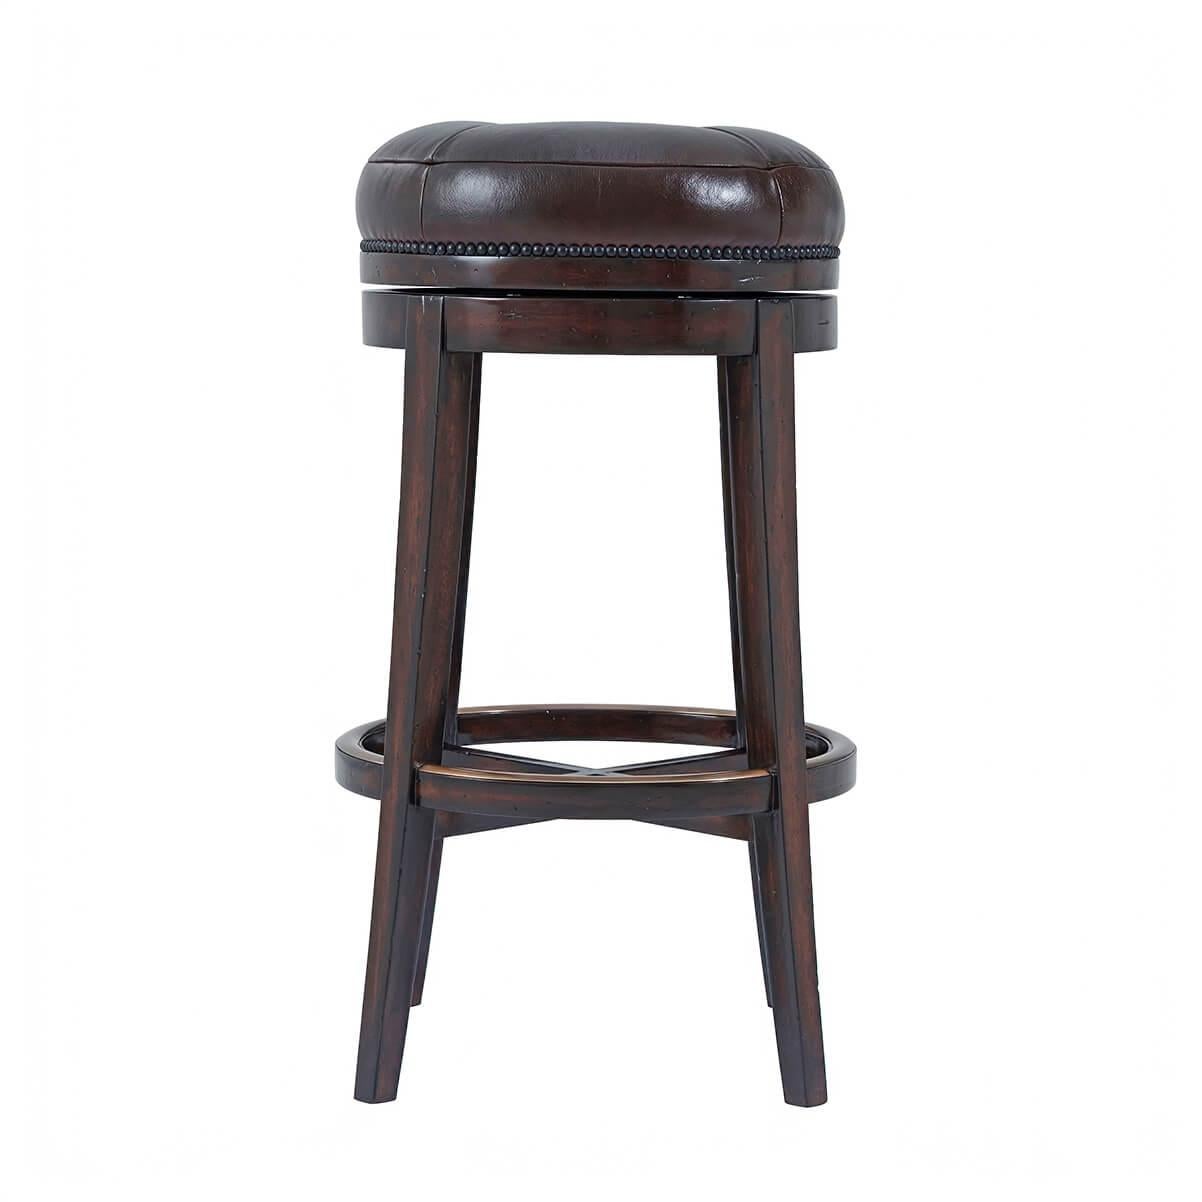 An English Victorian style swivel bar stool, the circular button upholstered turning seat above splayed legs joined by a brass mounted ring stretcher. The original Victorian.

Dimensions: 20